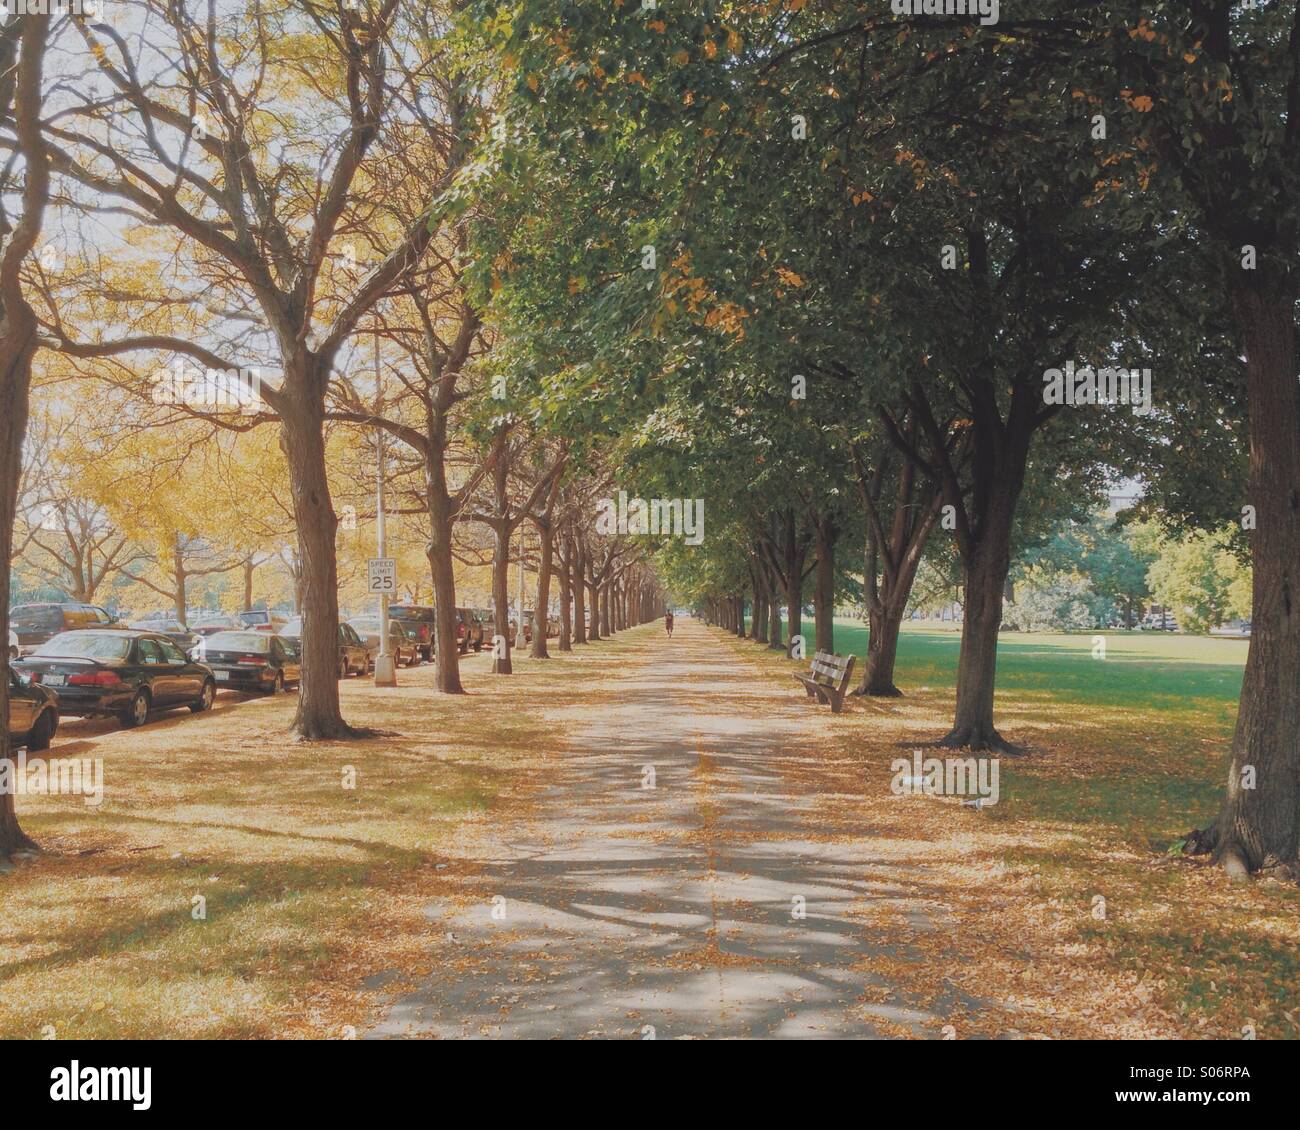 Midway Plaisance at The University of Chicago in the Hyde Park area of Chicago, IL, USA in early fall 2014. Stock Photo